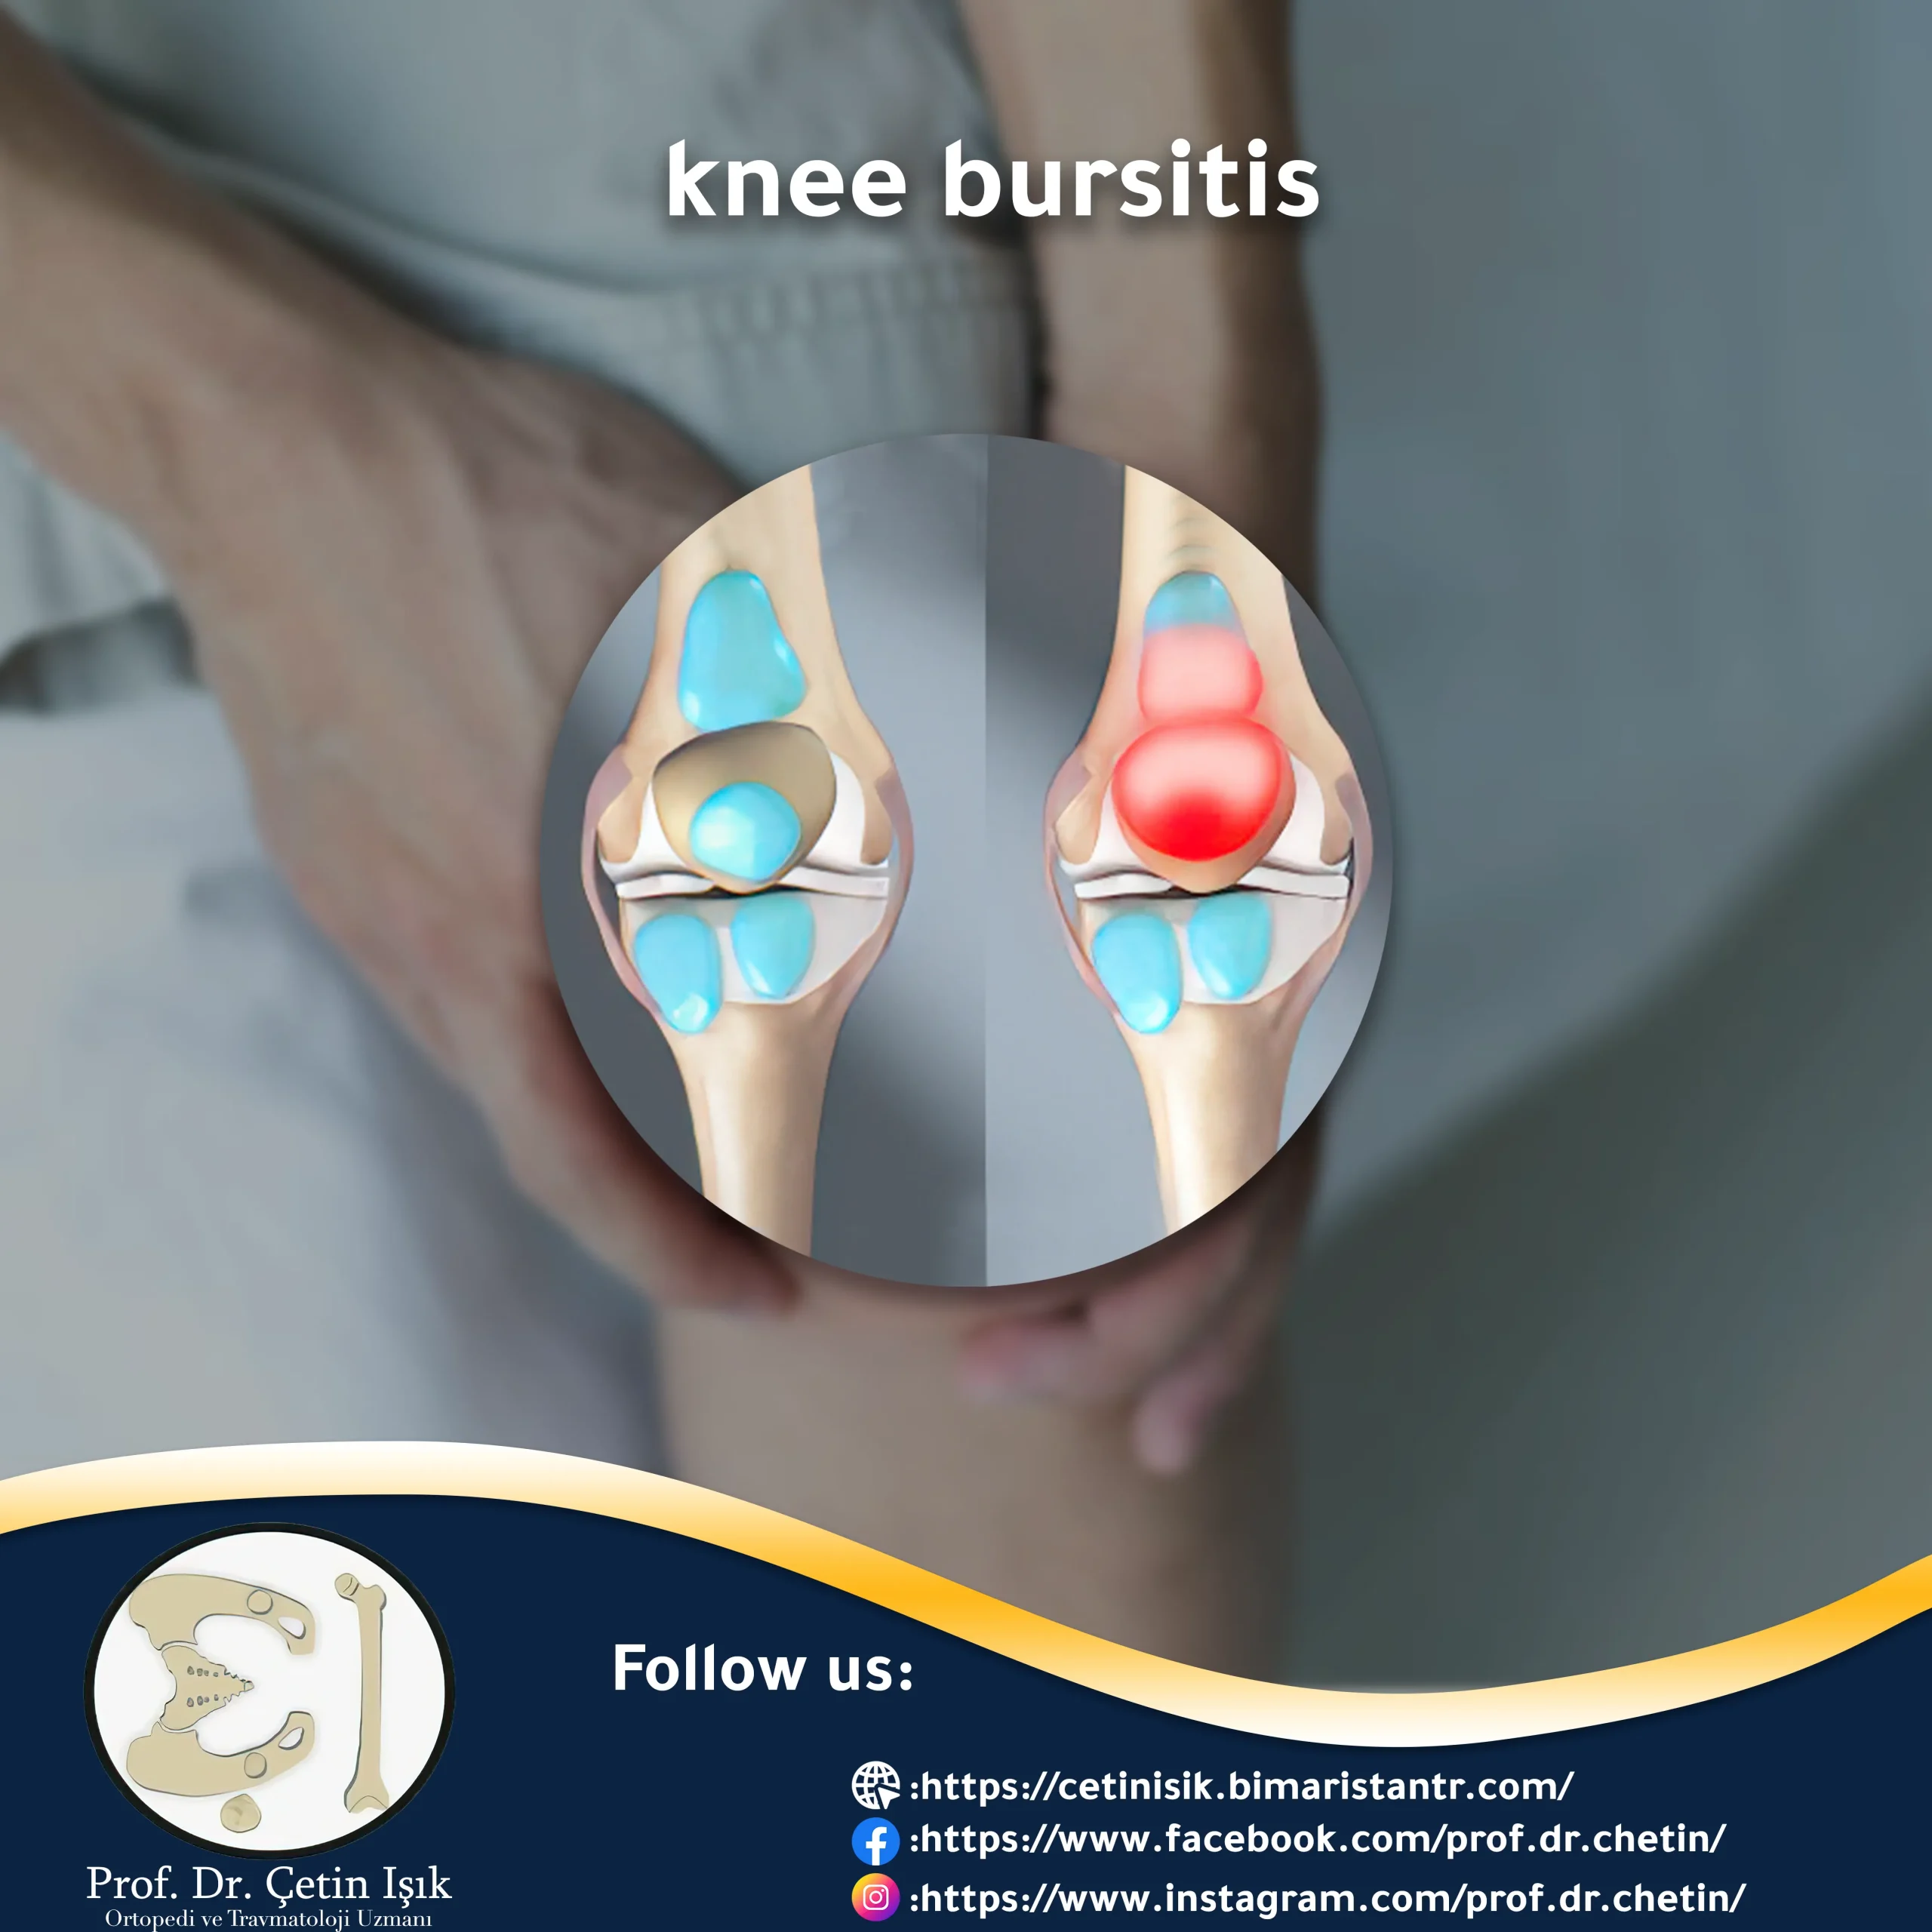 An image showing knee bursitis and how to treat it. This condition is usually not symptomatic. When it causes symptoms that are concentrated in the kneecap and knee joint, the pain may spread up or down.